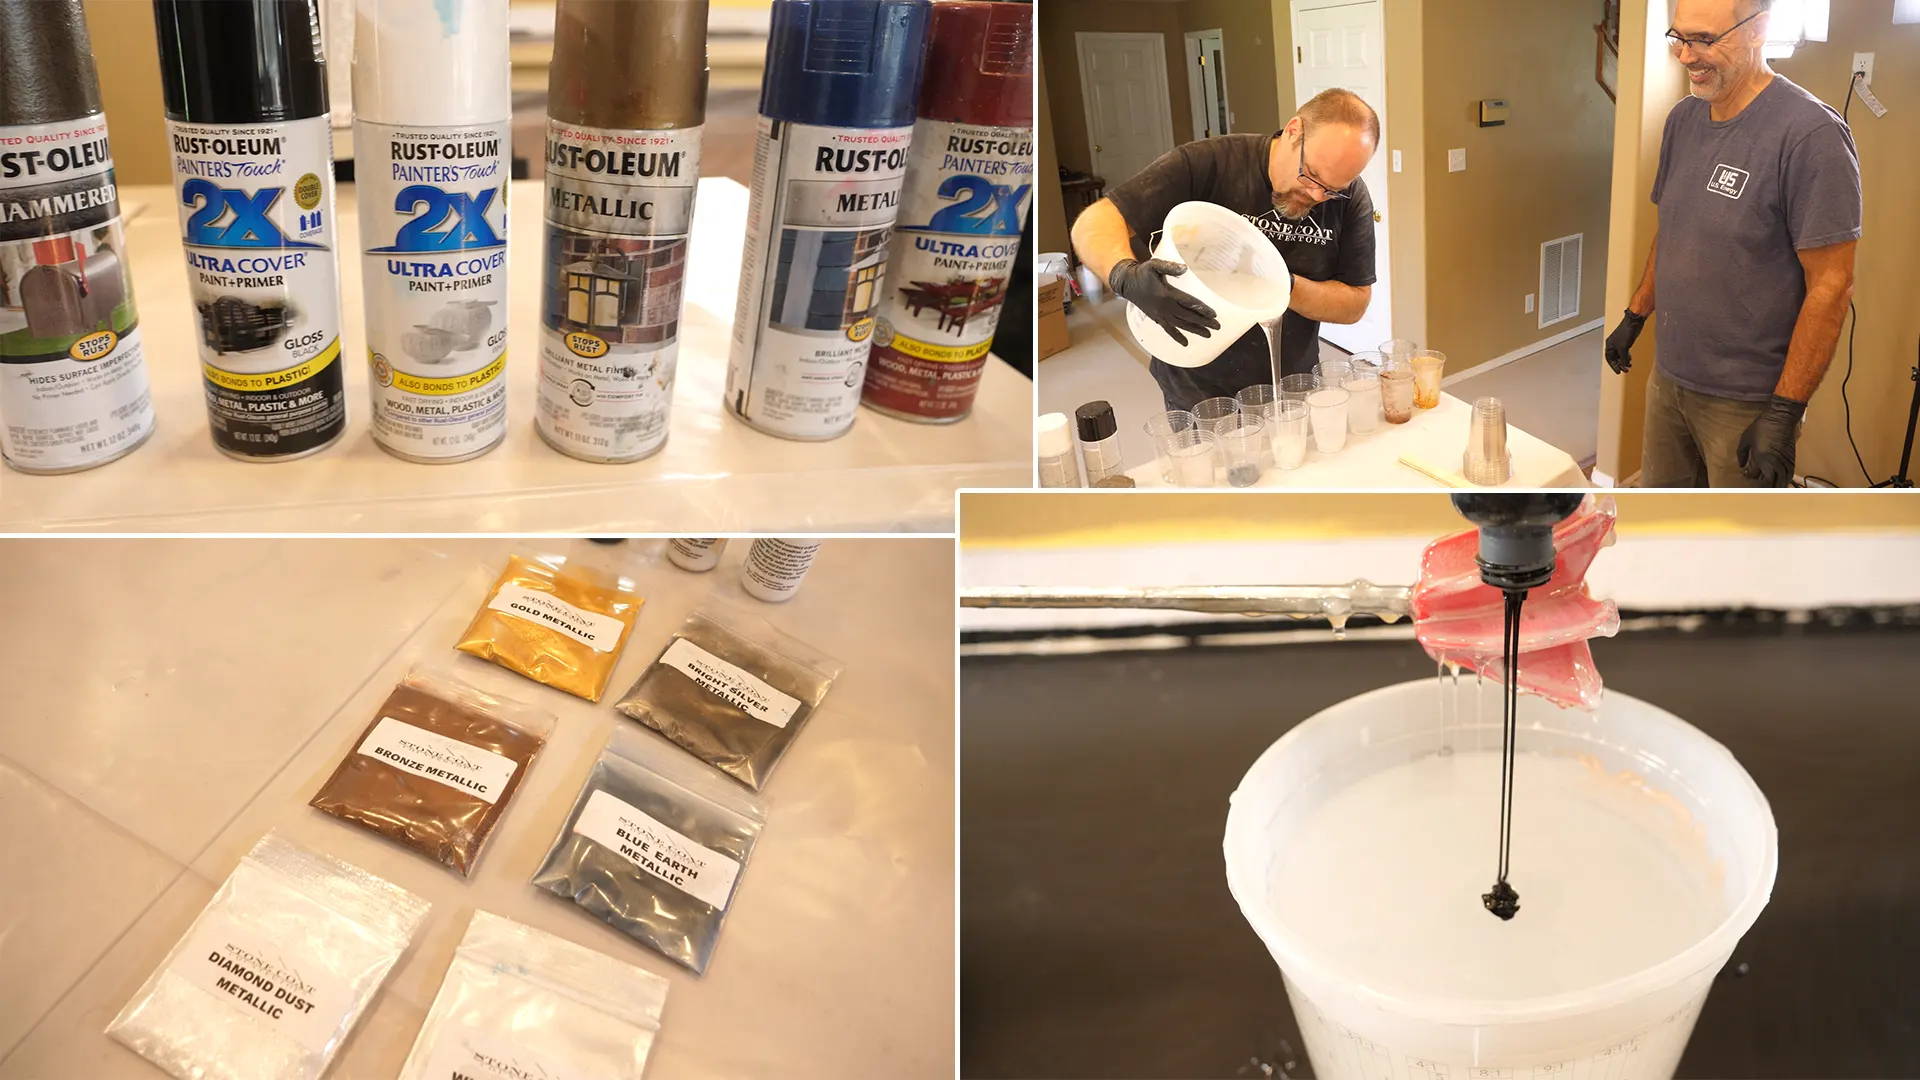 Tinting epoxy with colors: Pour epoxy into separate cups for each color and add spray paint, metallic powder, or liquid epoxy dye as needed.